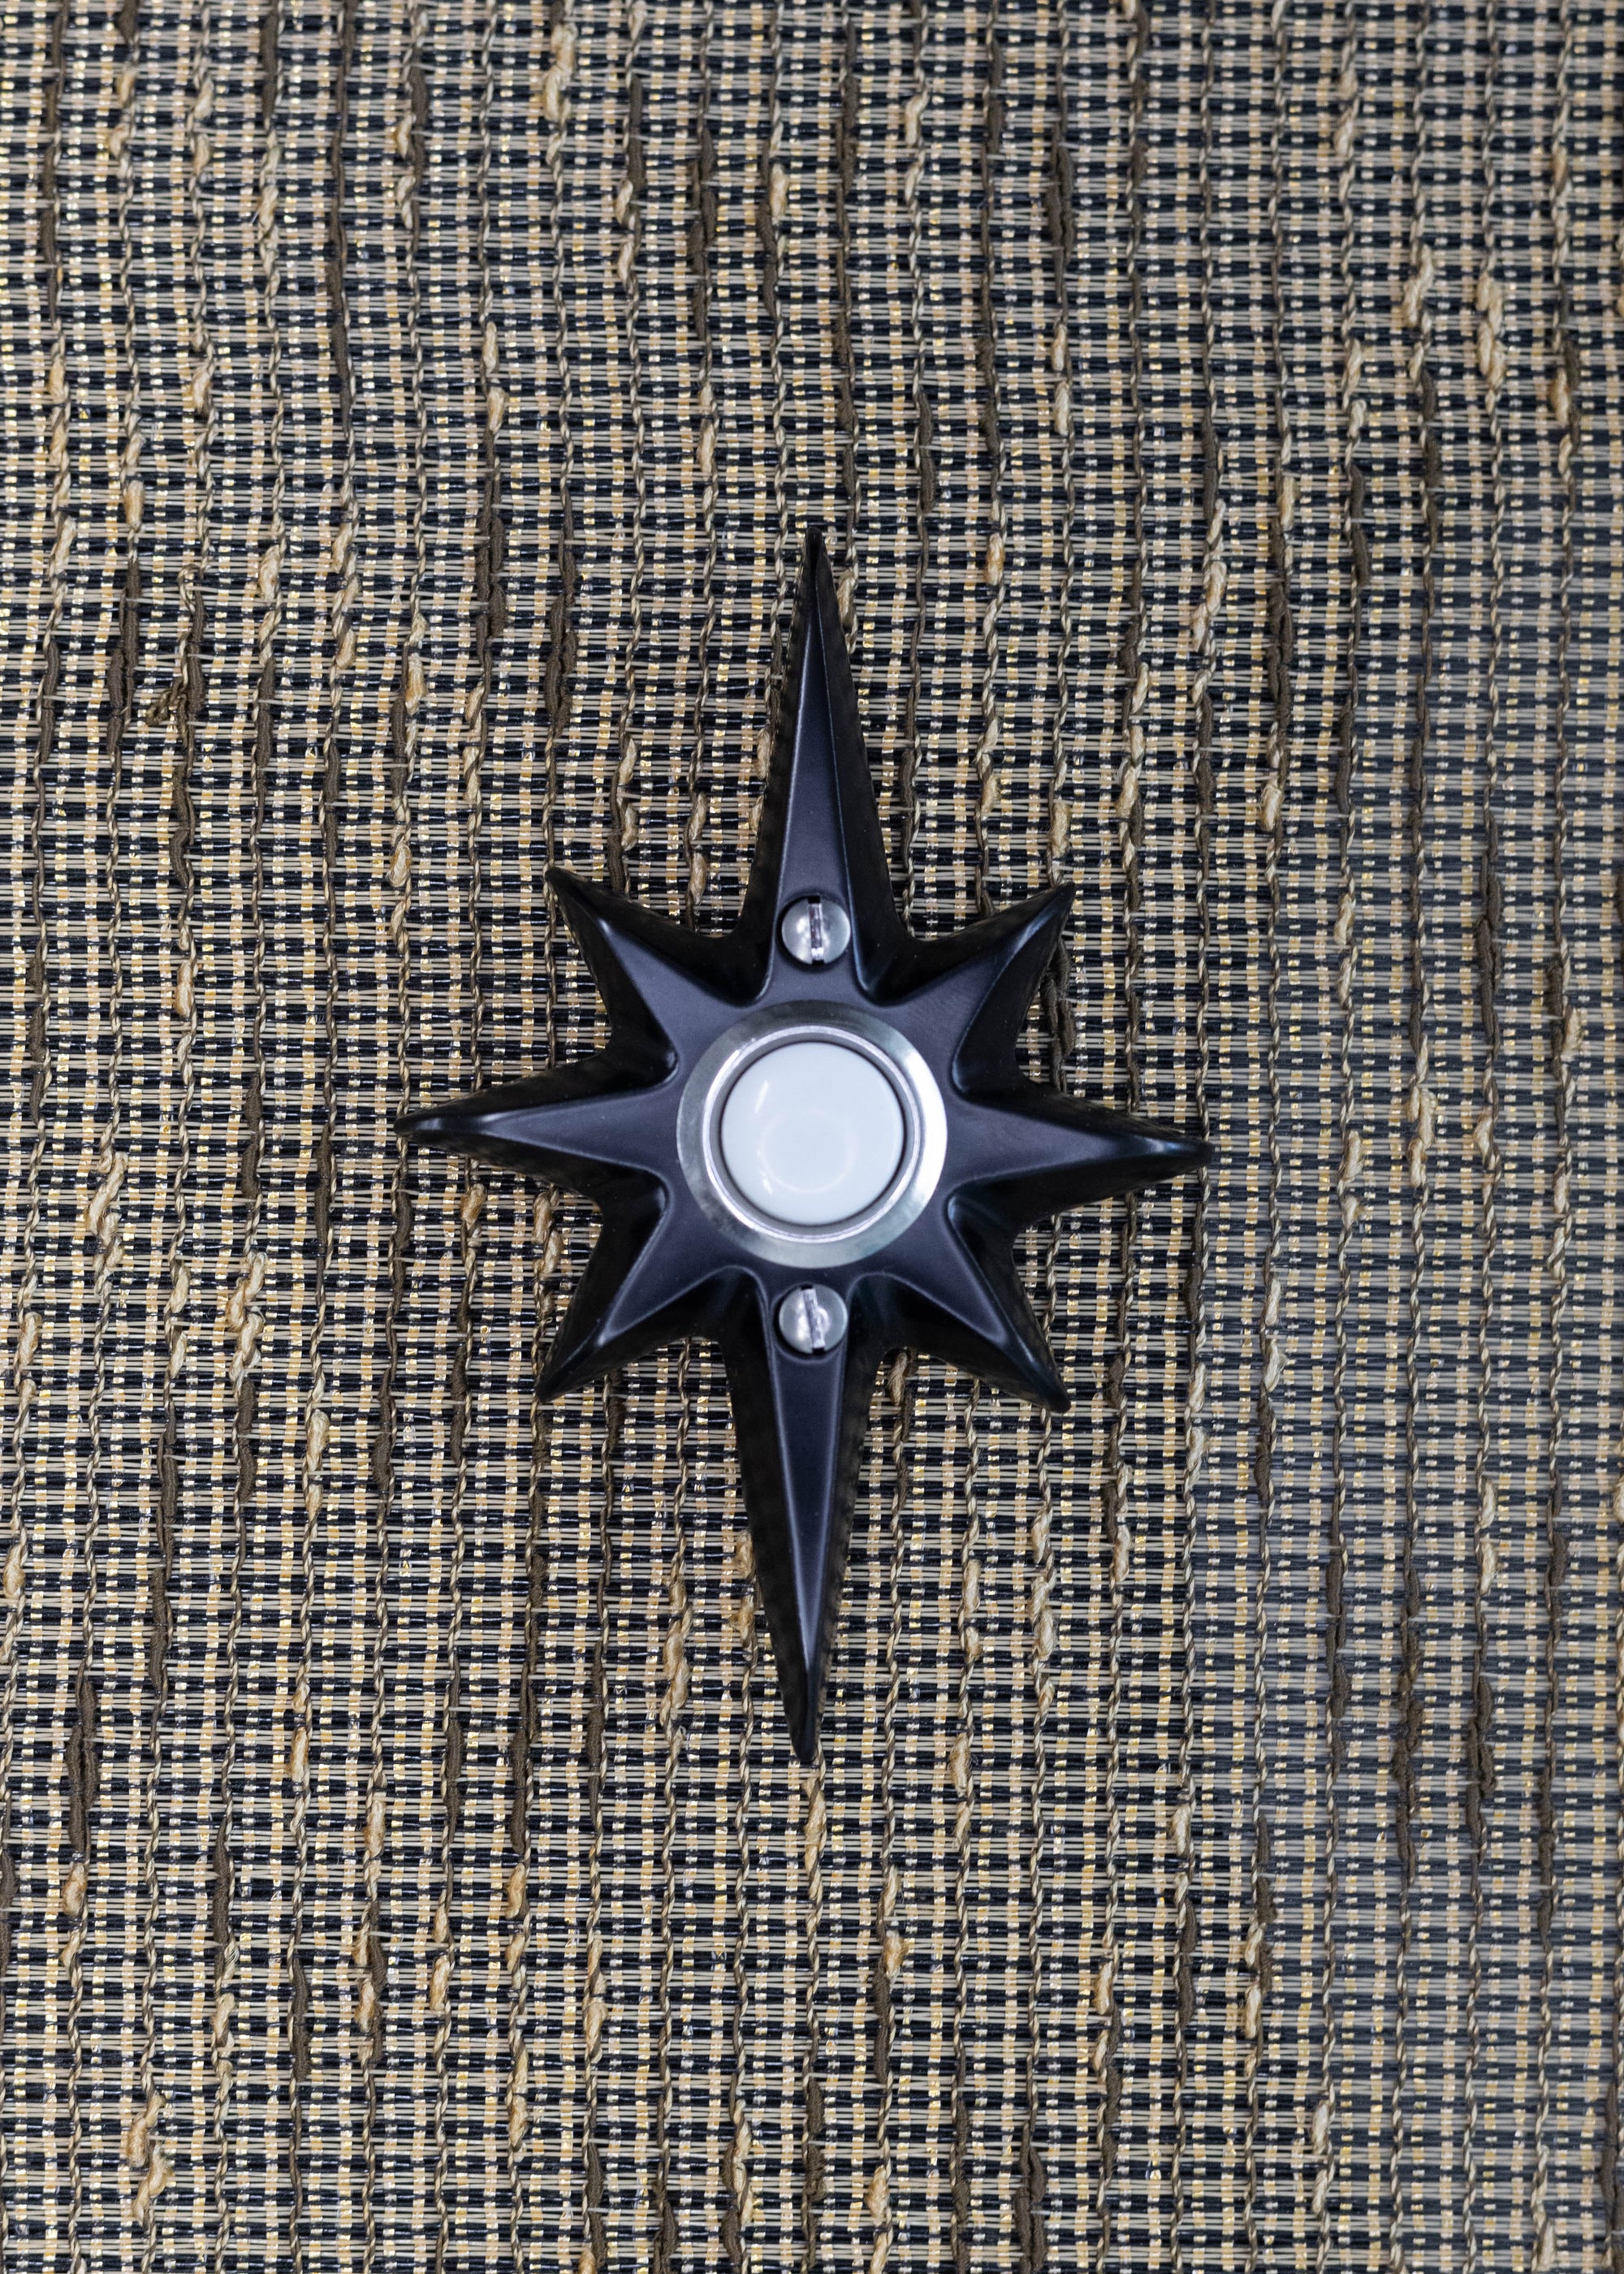 A small black powder coated cast aluminum starburst with a door bell in the center. The door bell is a white plastic with a silver metal rim. There are two silver screws, one above and below the doorbell. The powder coating is very smooth, and reflects a bit of light, but is not glossy.